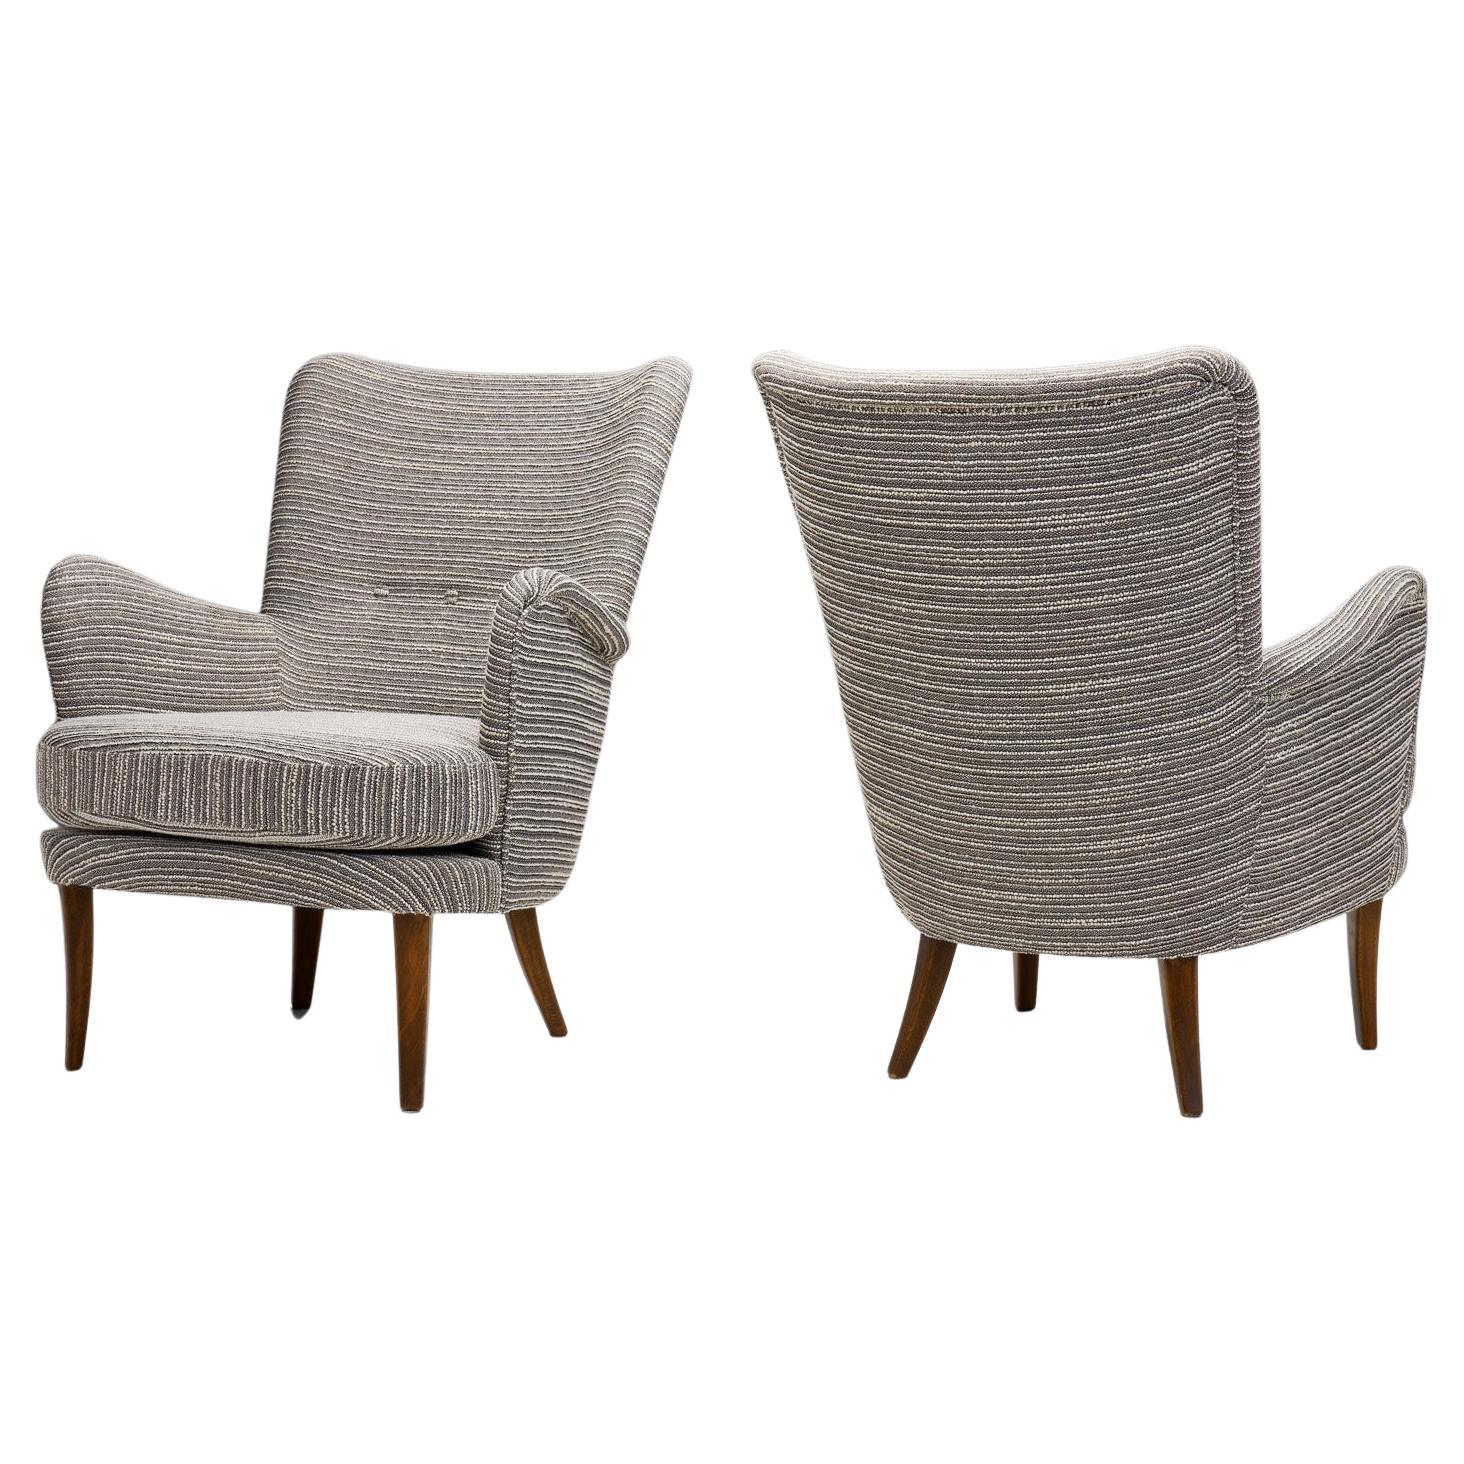 A Pair of "Stora Furulid” Armchairs by Carl Malmsten, Sweden 1950s